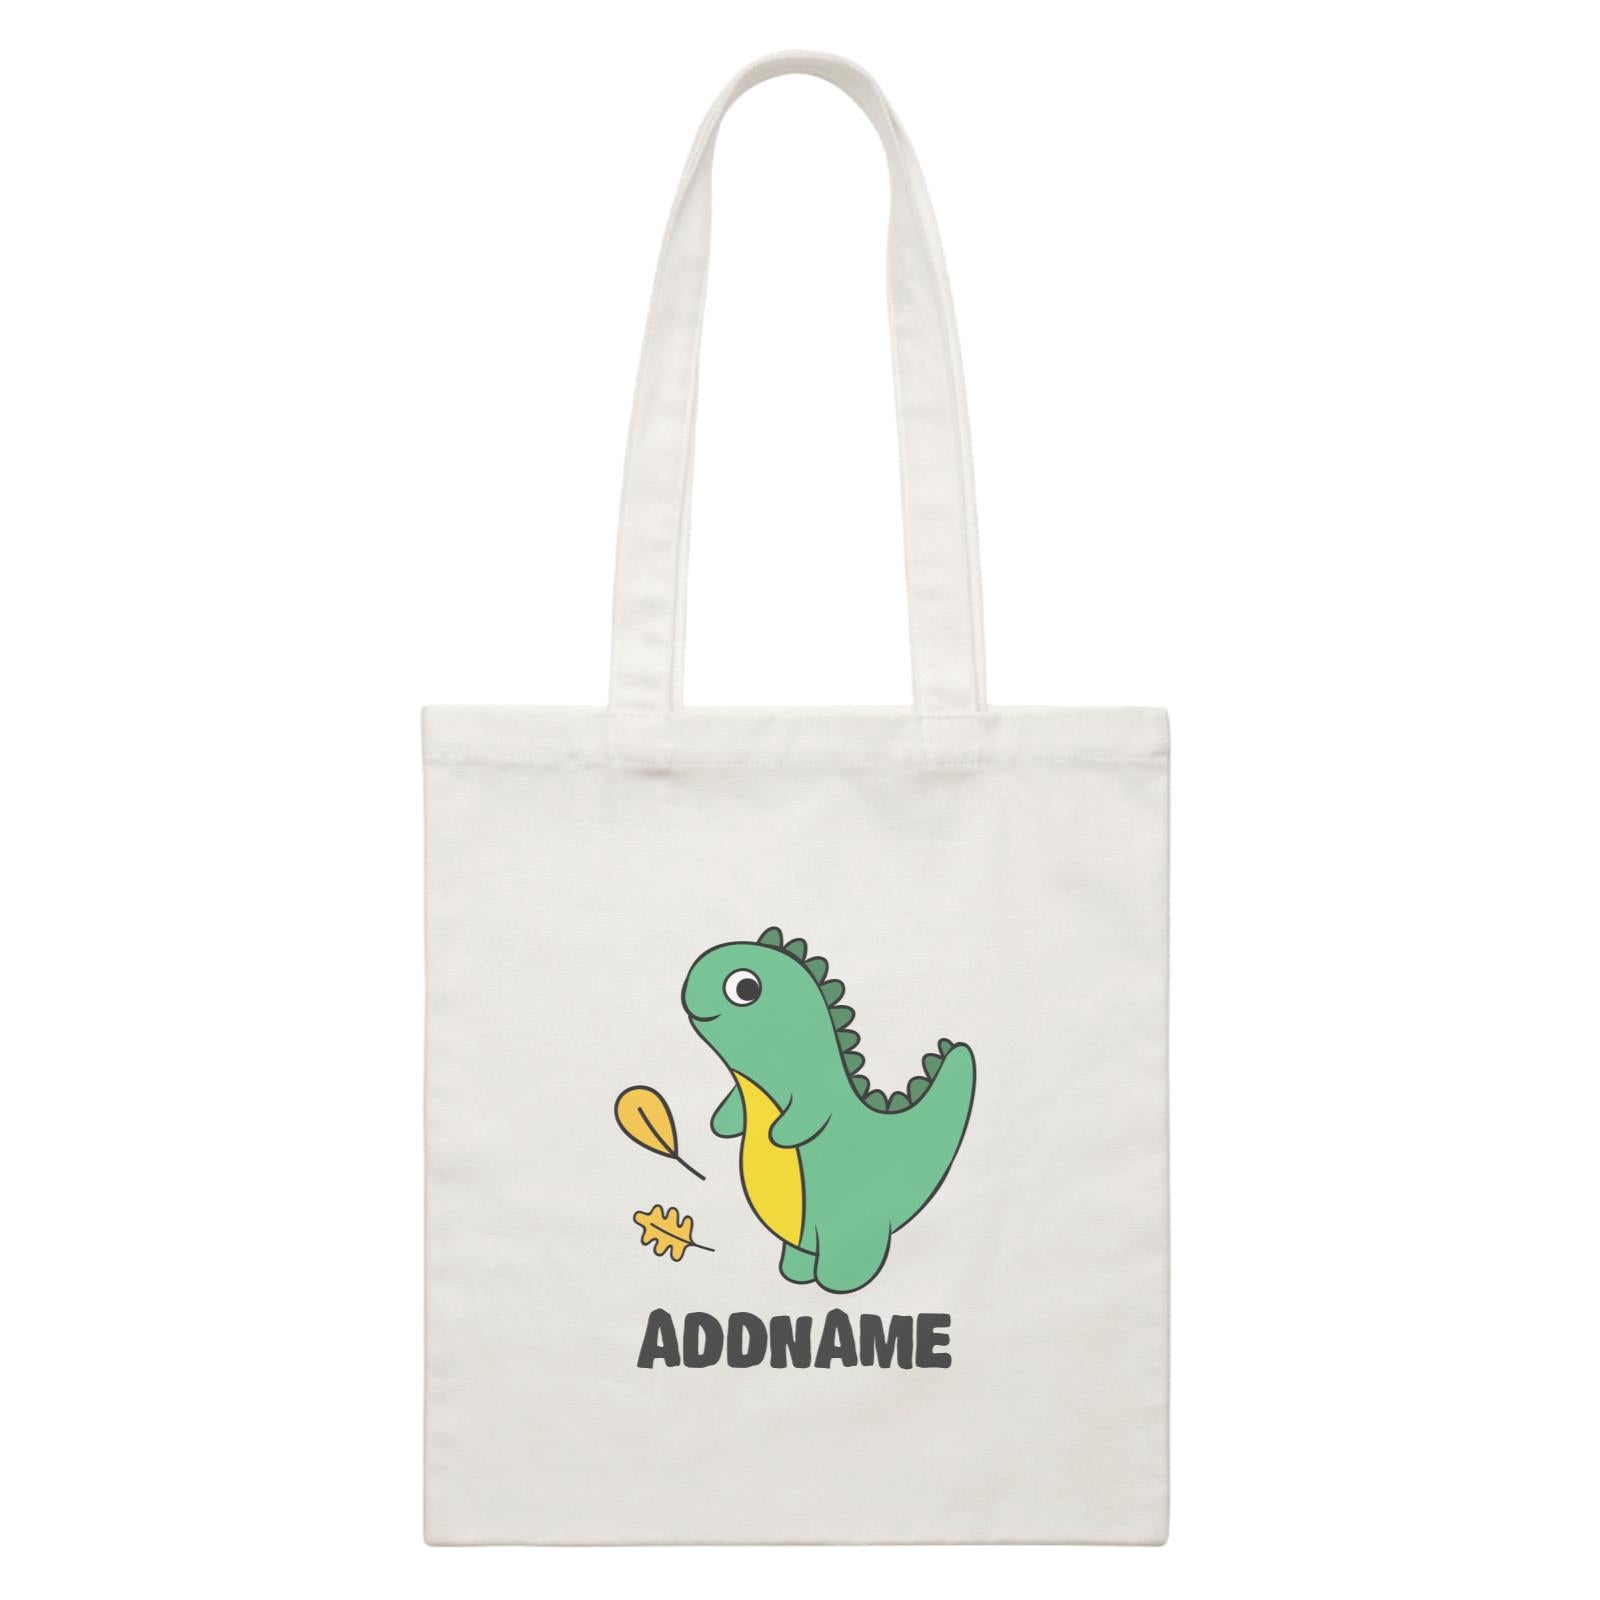 Super Cute Dinosaur With Yellow Leaves White Canvas Bag